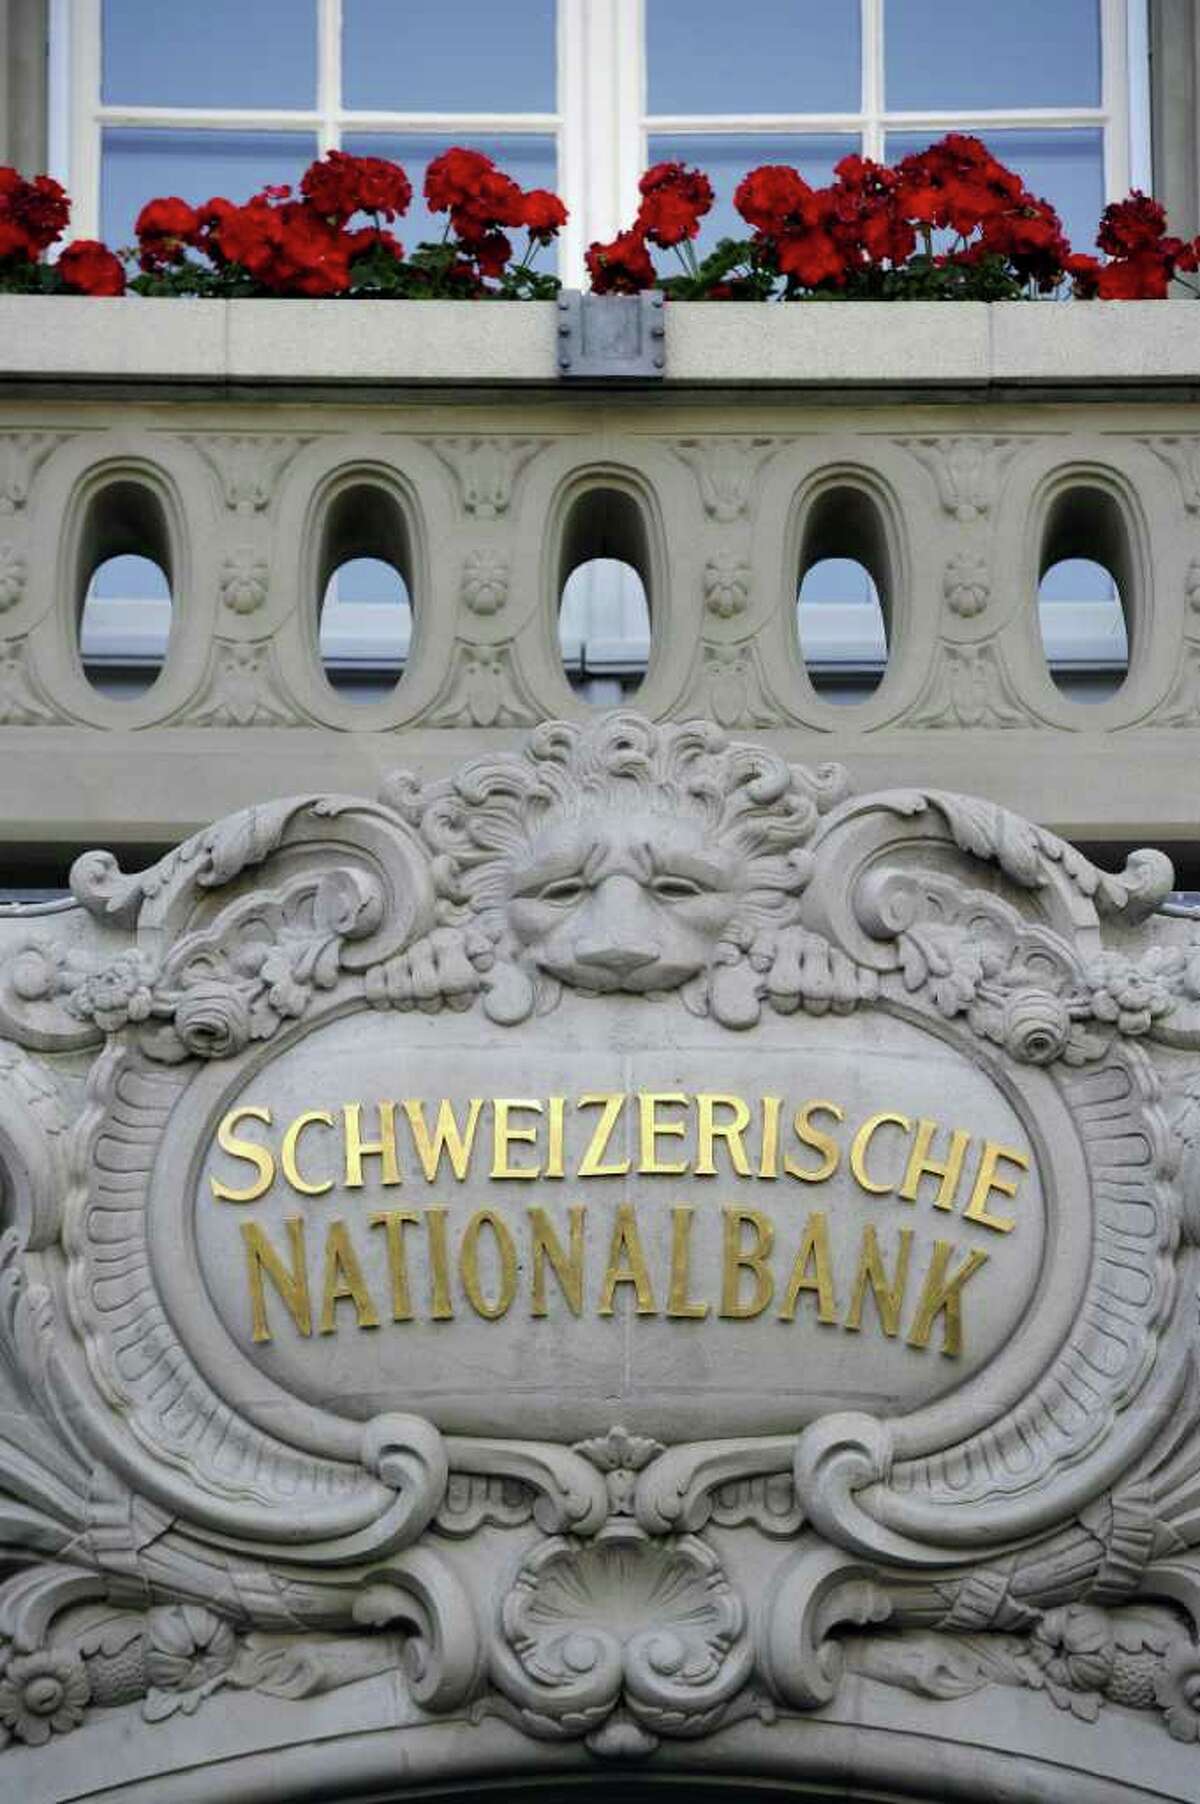 Swiss National Bank chief Philipp Hildebrand and his wife reportedly profited as he led efforts to lower the Swiss franc's value. After withering criticism, the bank released its guidelines for senior officials.